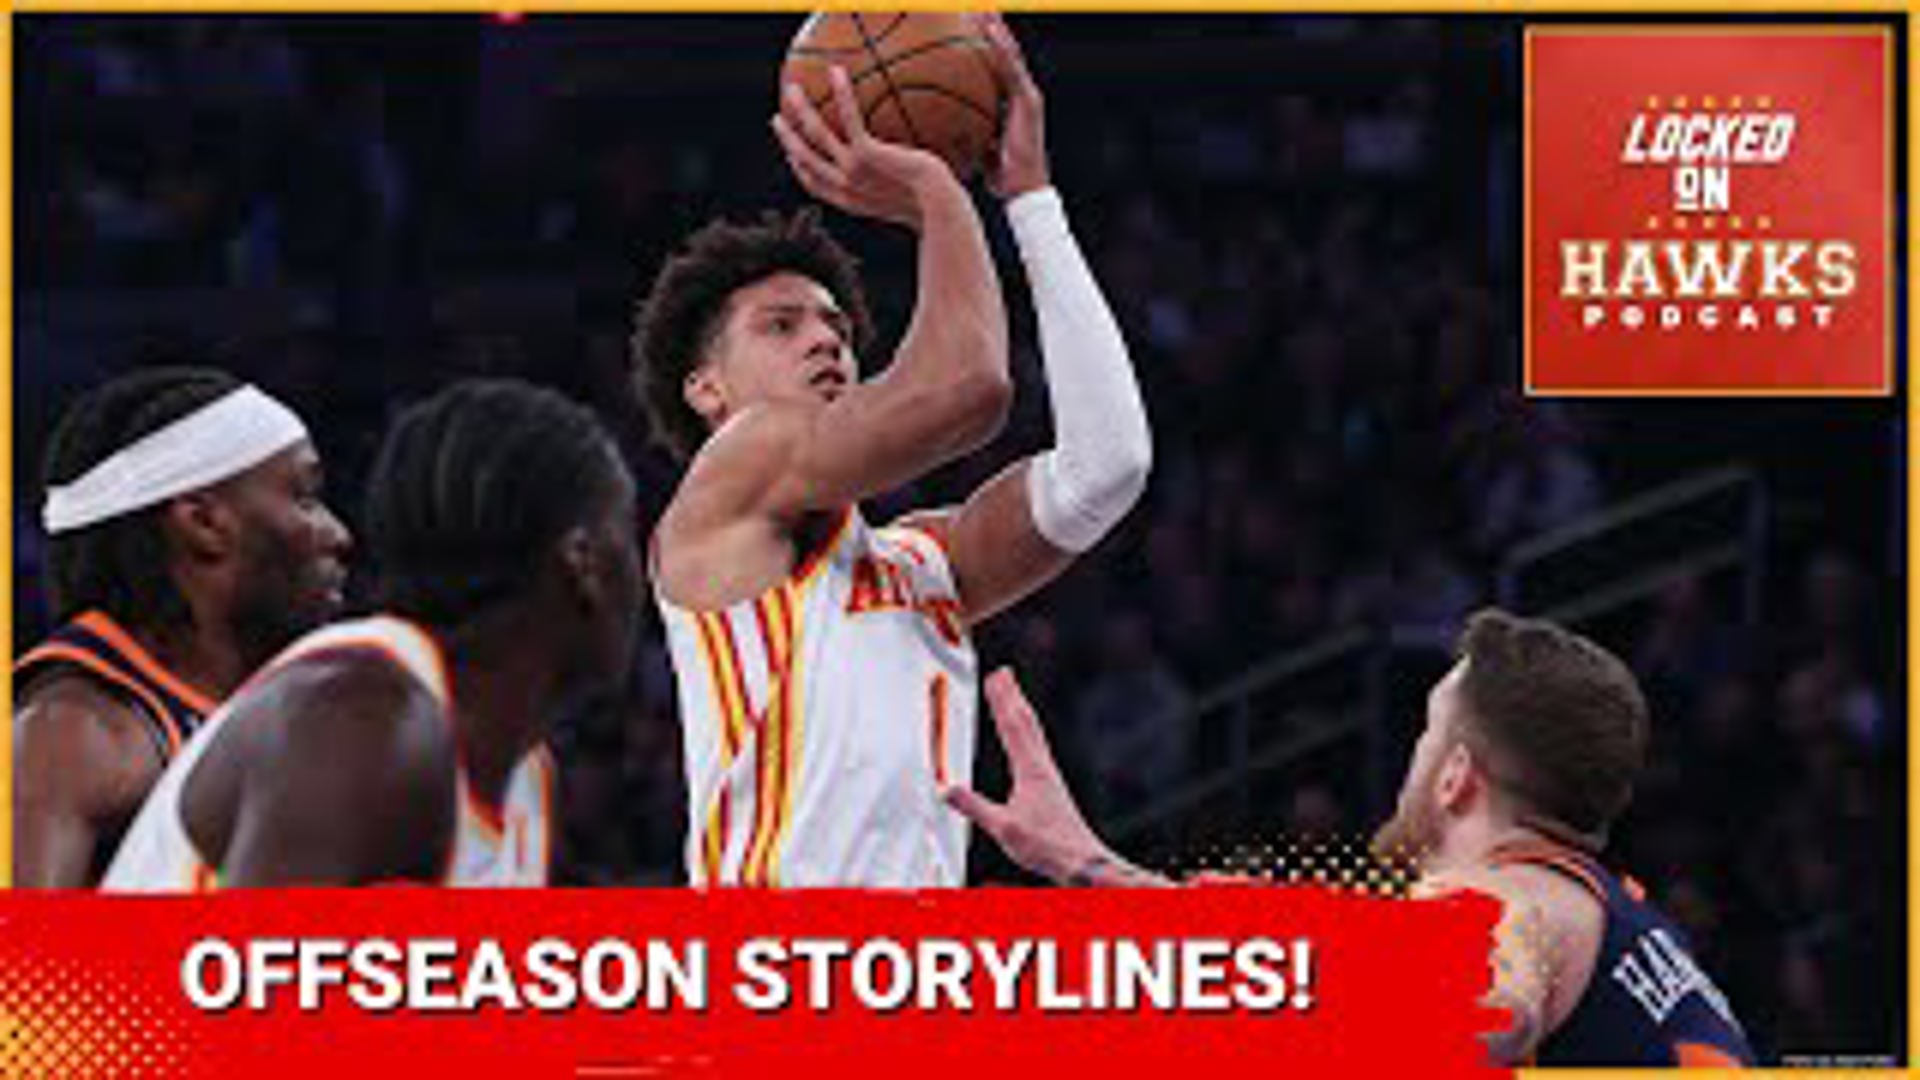 The show outlines seven offseason storylines for the Atlanta Hawks, ranging from Jalen Johnson's extension talks to a roster crunch, the Olympics, and much more.